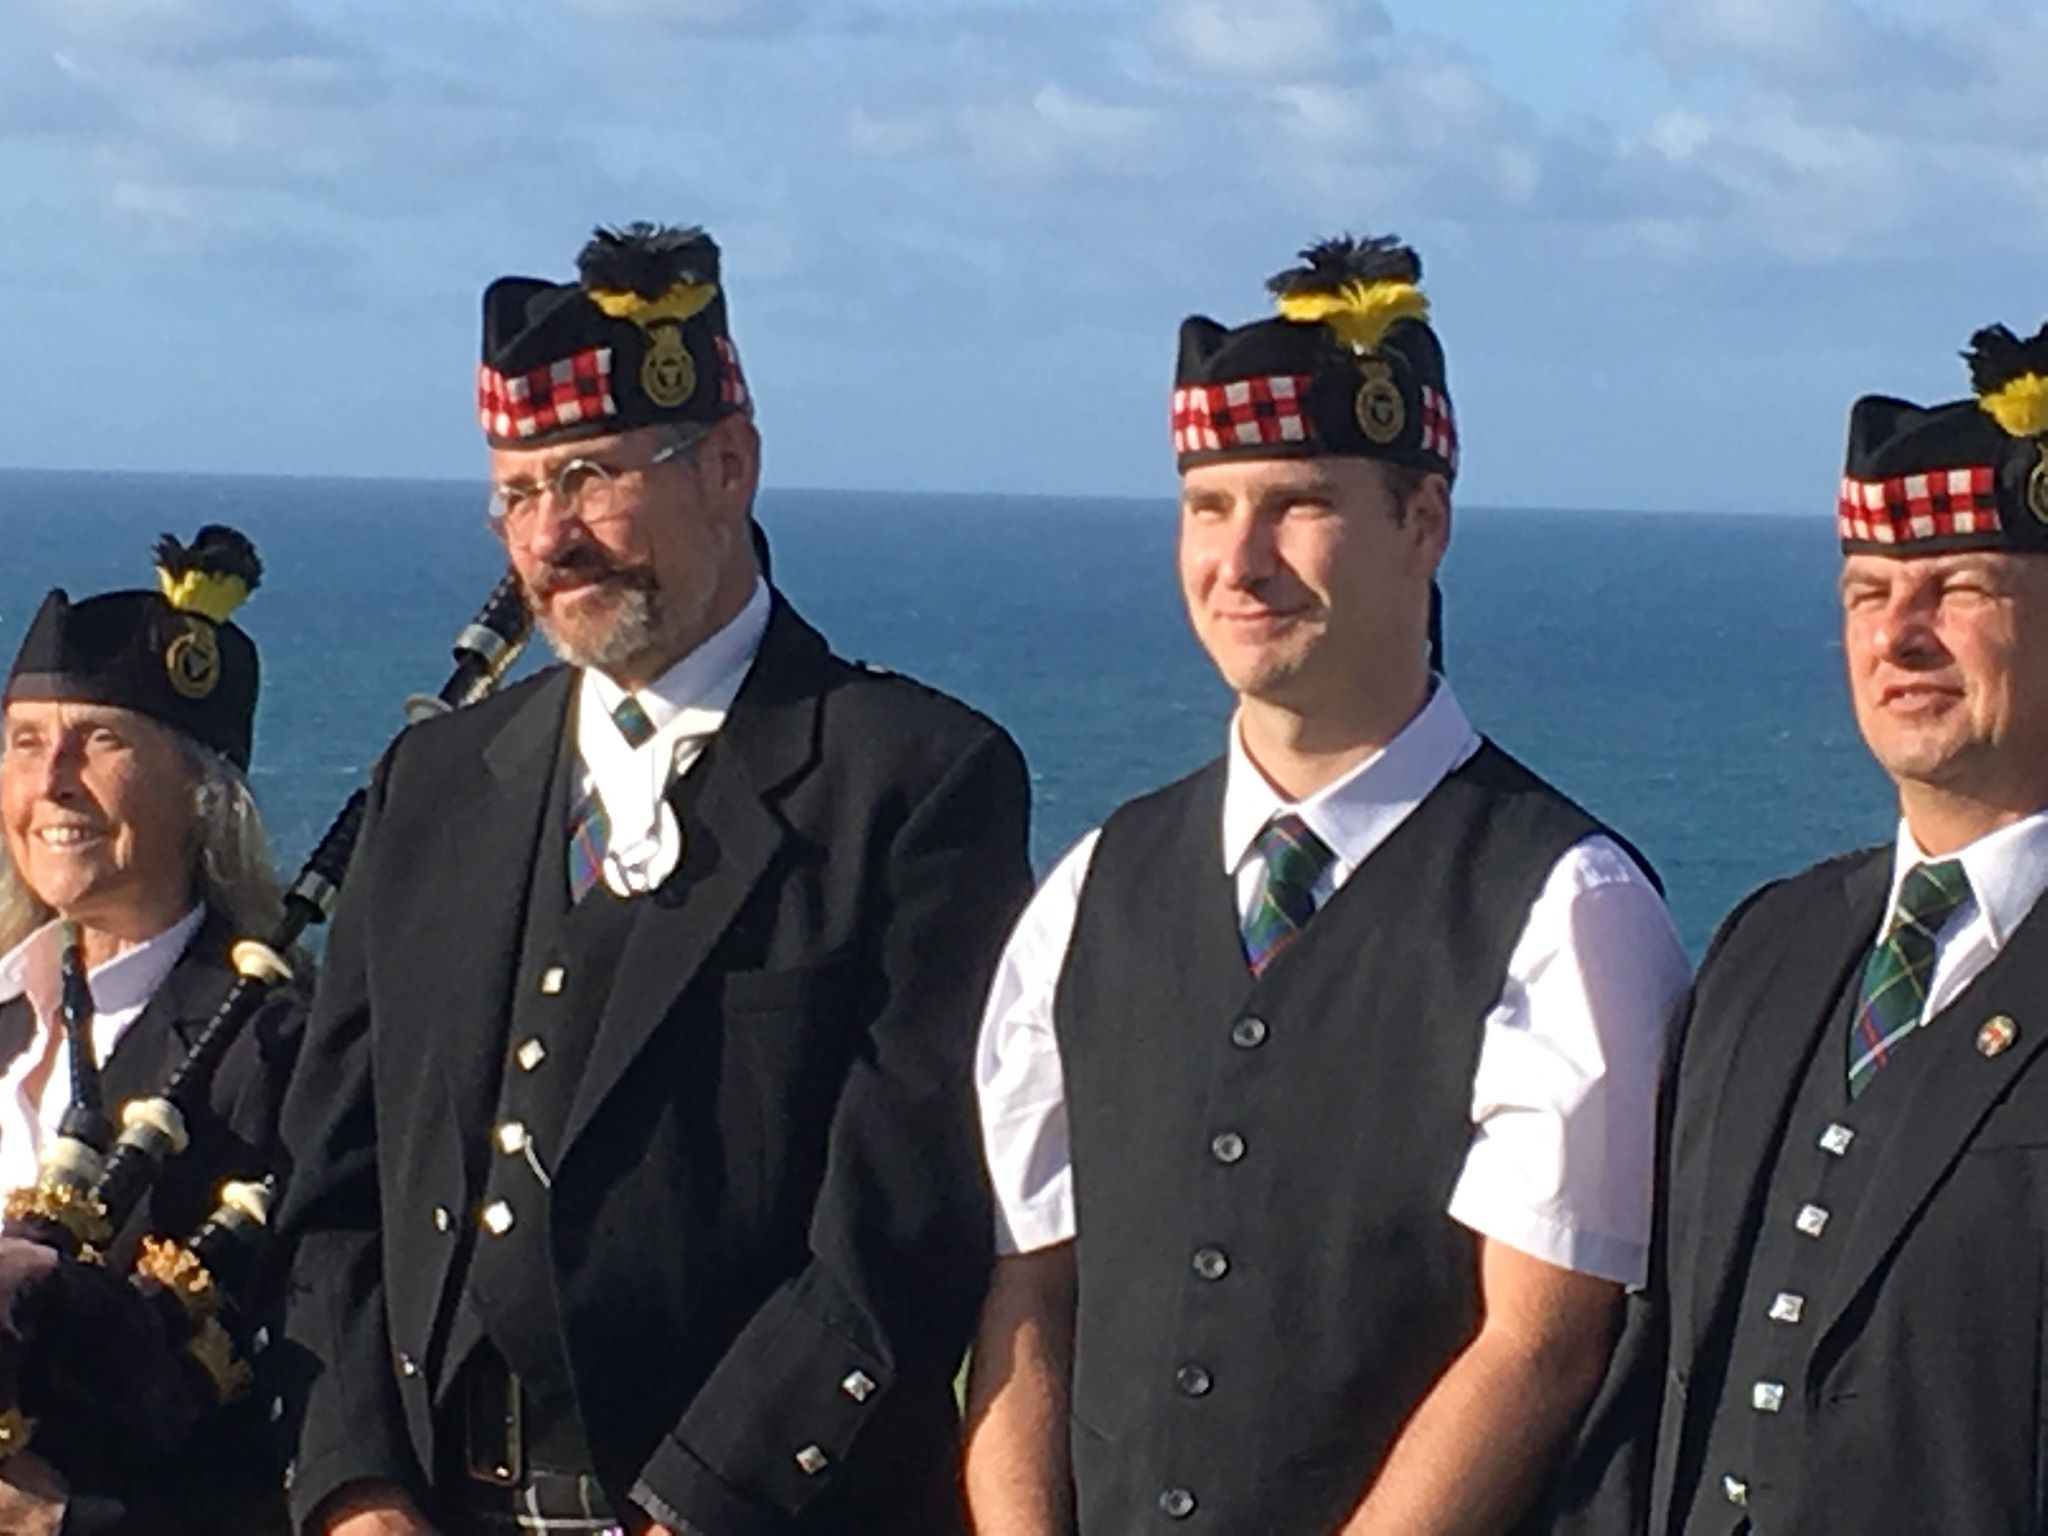 Kernow Pipes and Drums at Port Isaac carnival 2019